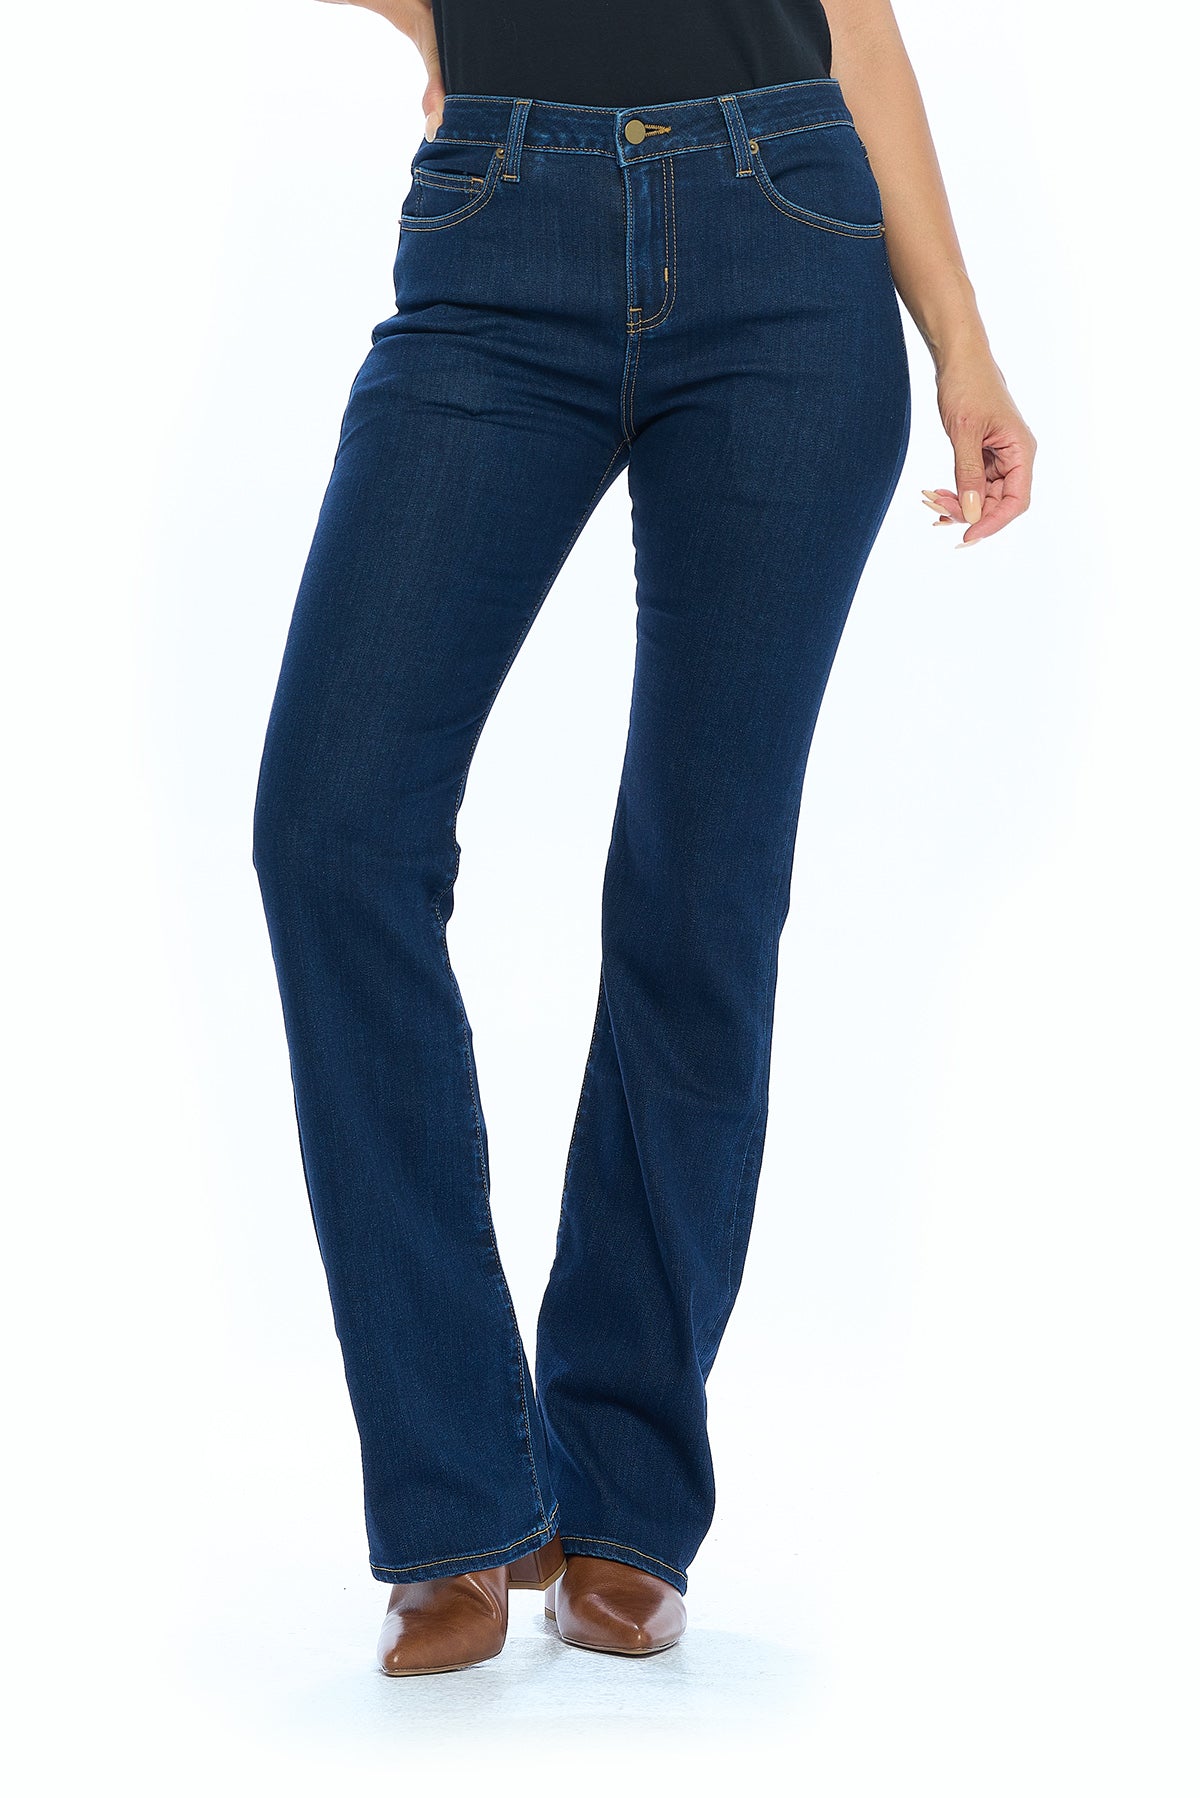 BISUAL Women's Black Bell Bottom Jeans for Women Indonesia